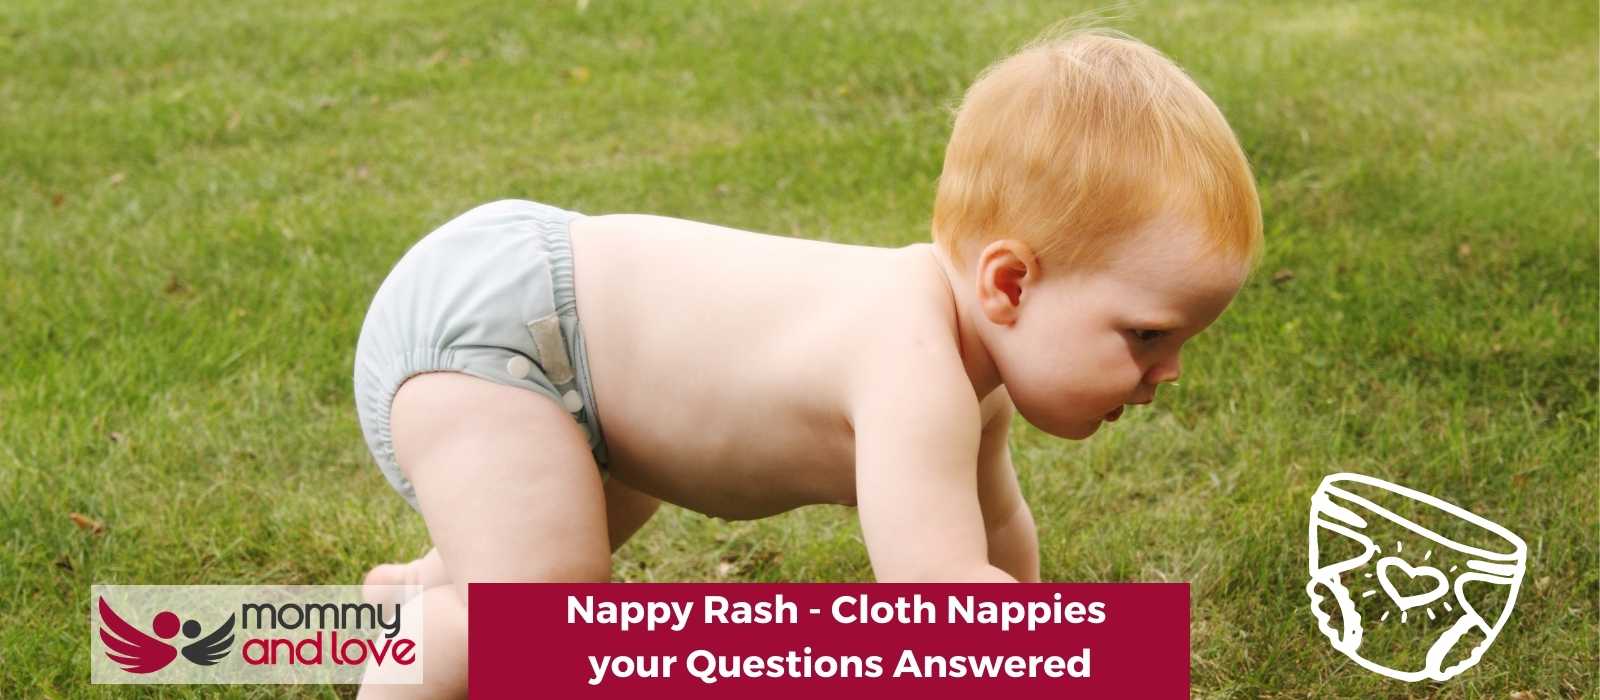 Nappy Rash - Cloth Nappies your Questions Answered